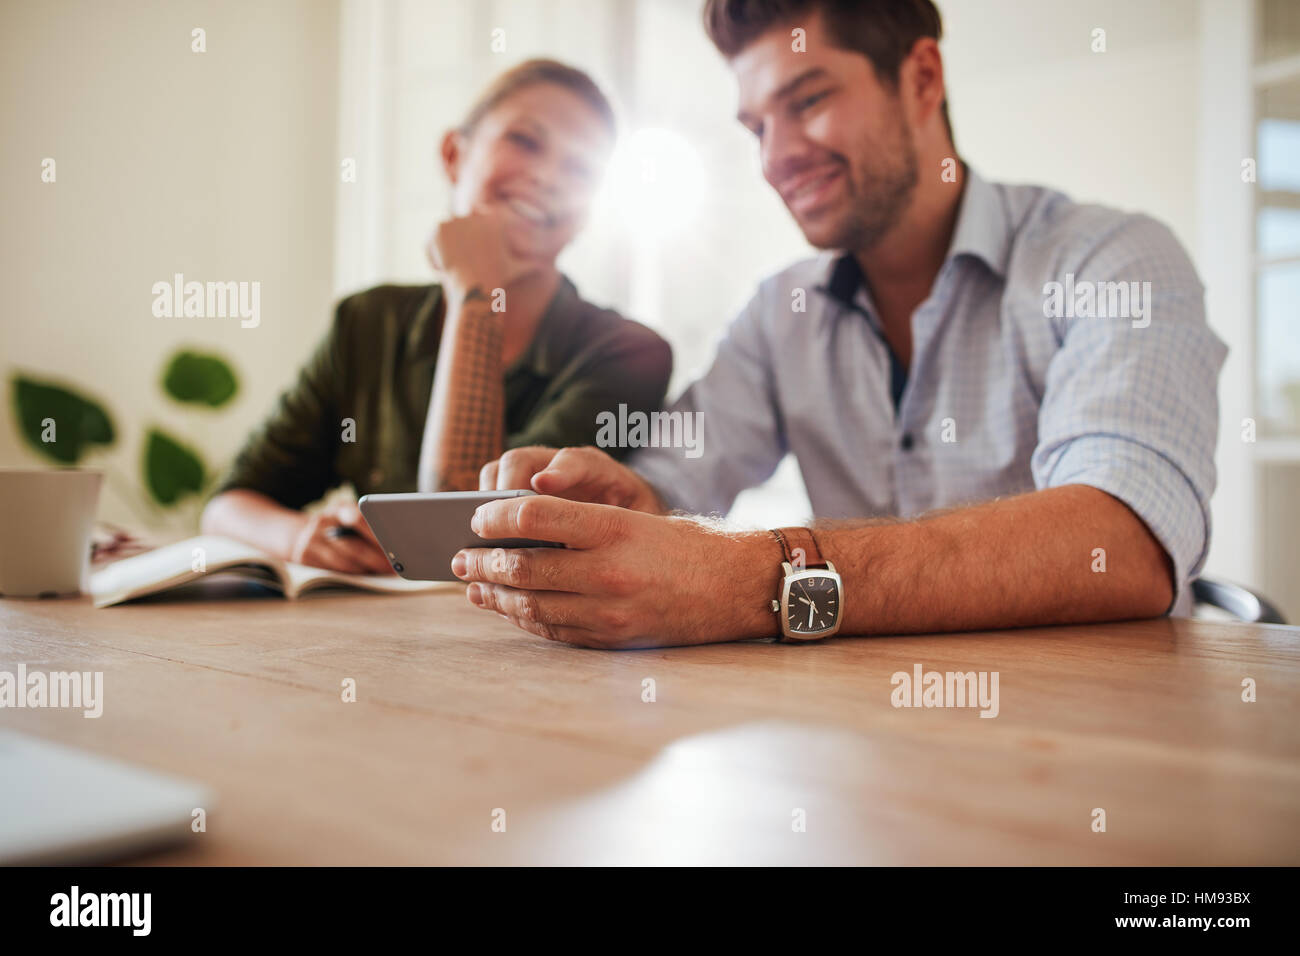 Shot of young couple at table using cellphone at home. Focus on mobile phone in man hands. Stock Photo